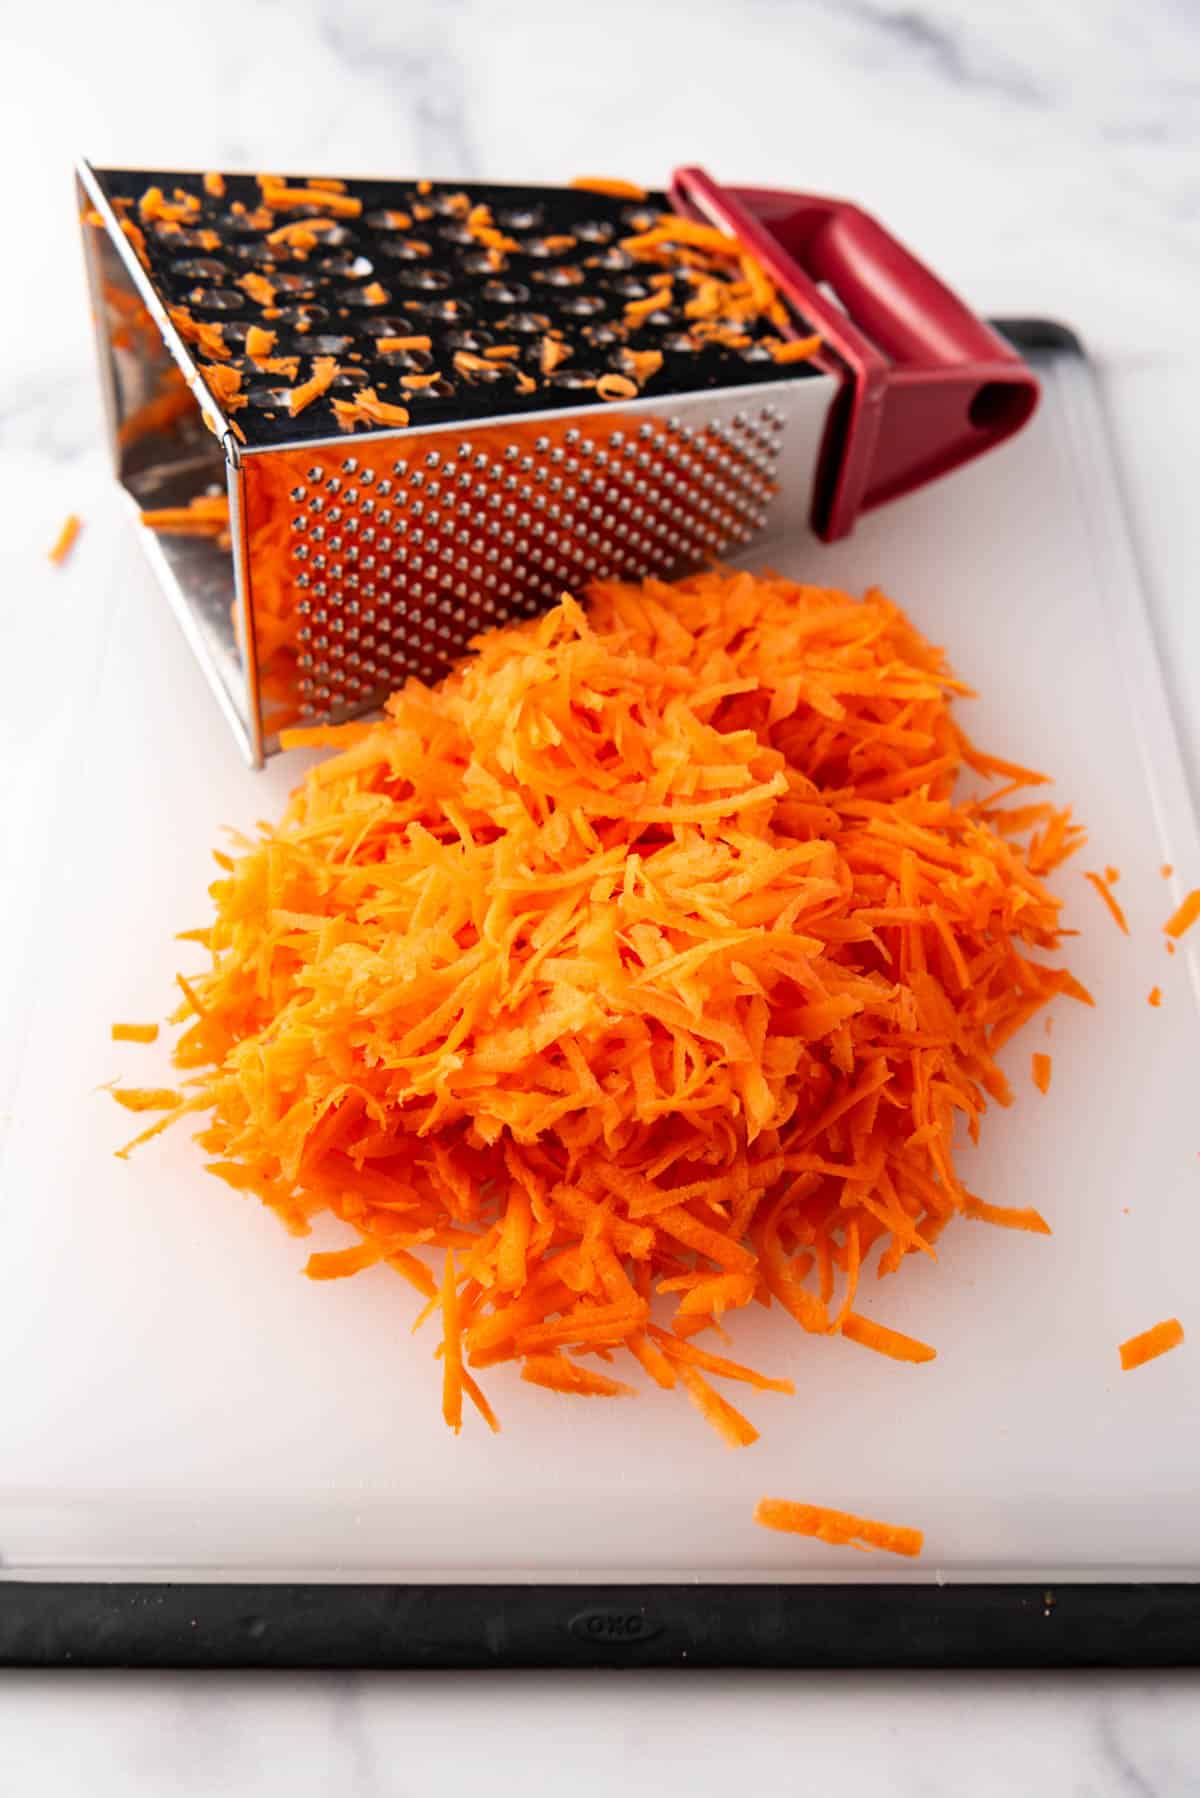 A large pile of shredded carrot in front of a box grater.